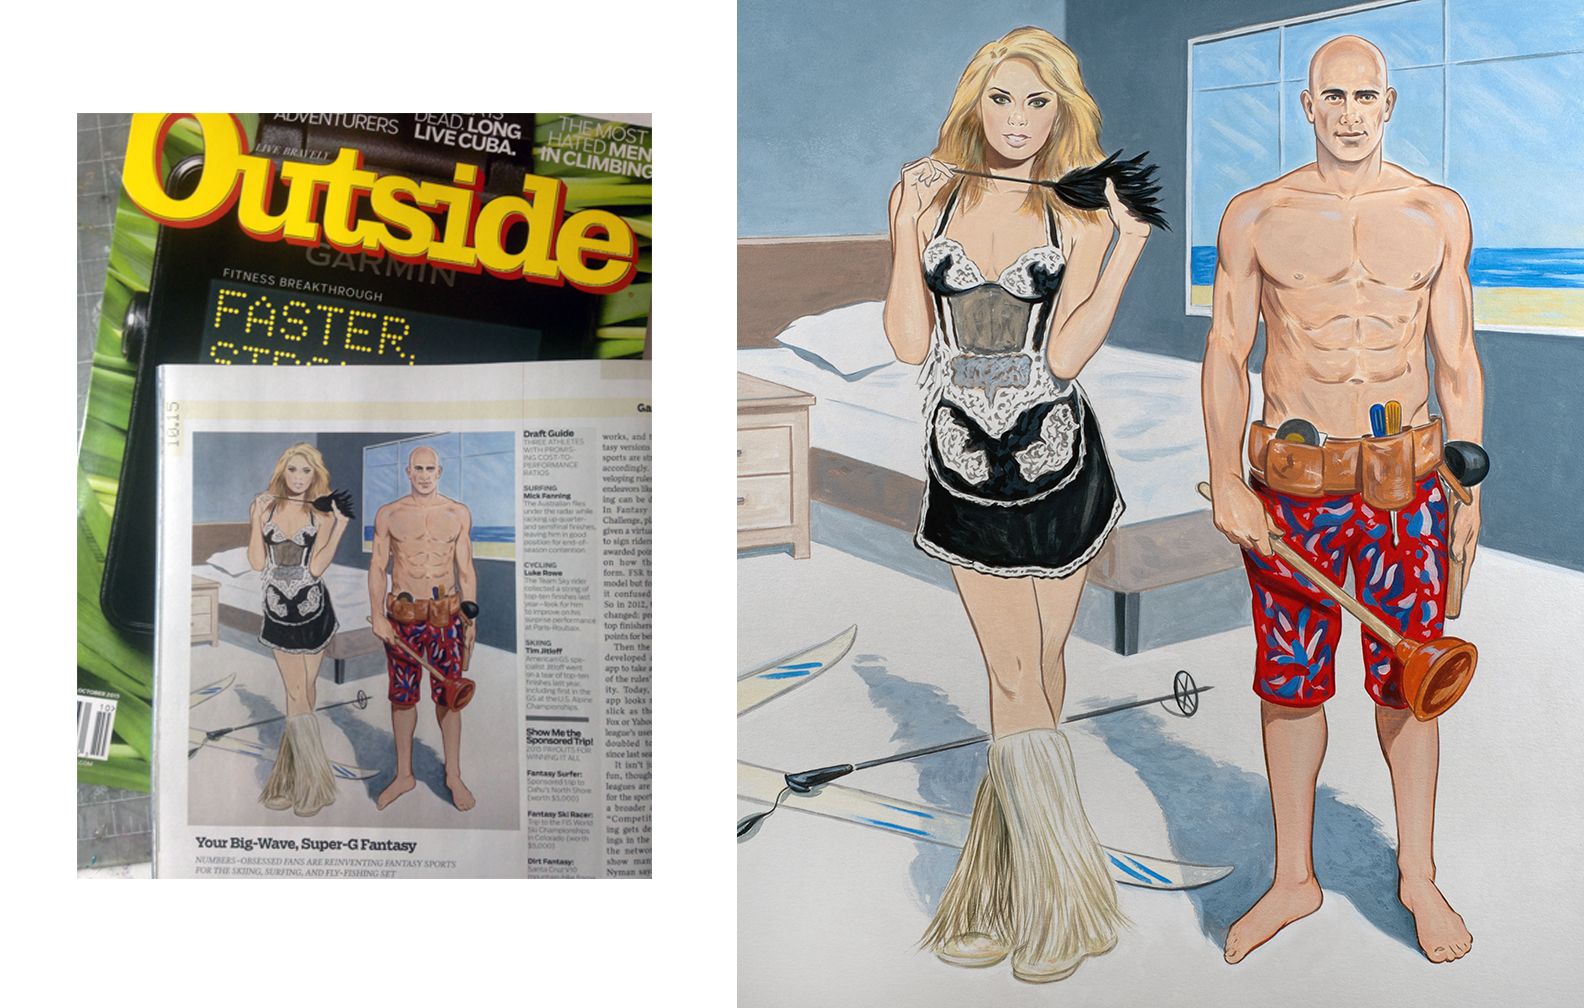   Fantasy Sports Leagues (Lindsey Vonn and Kelly Slater)&nbsp; | Outside Magazine October 2015 